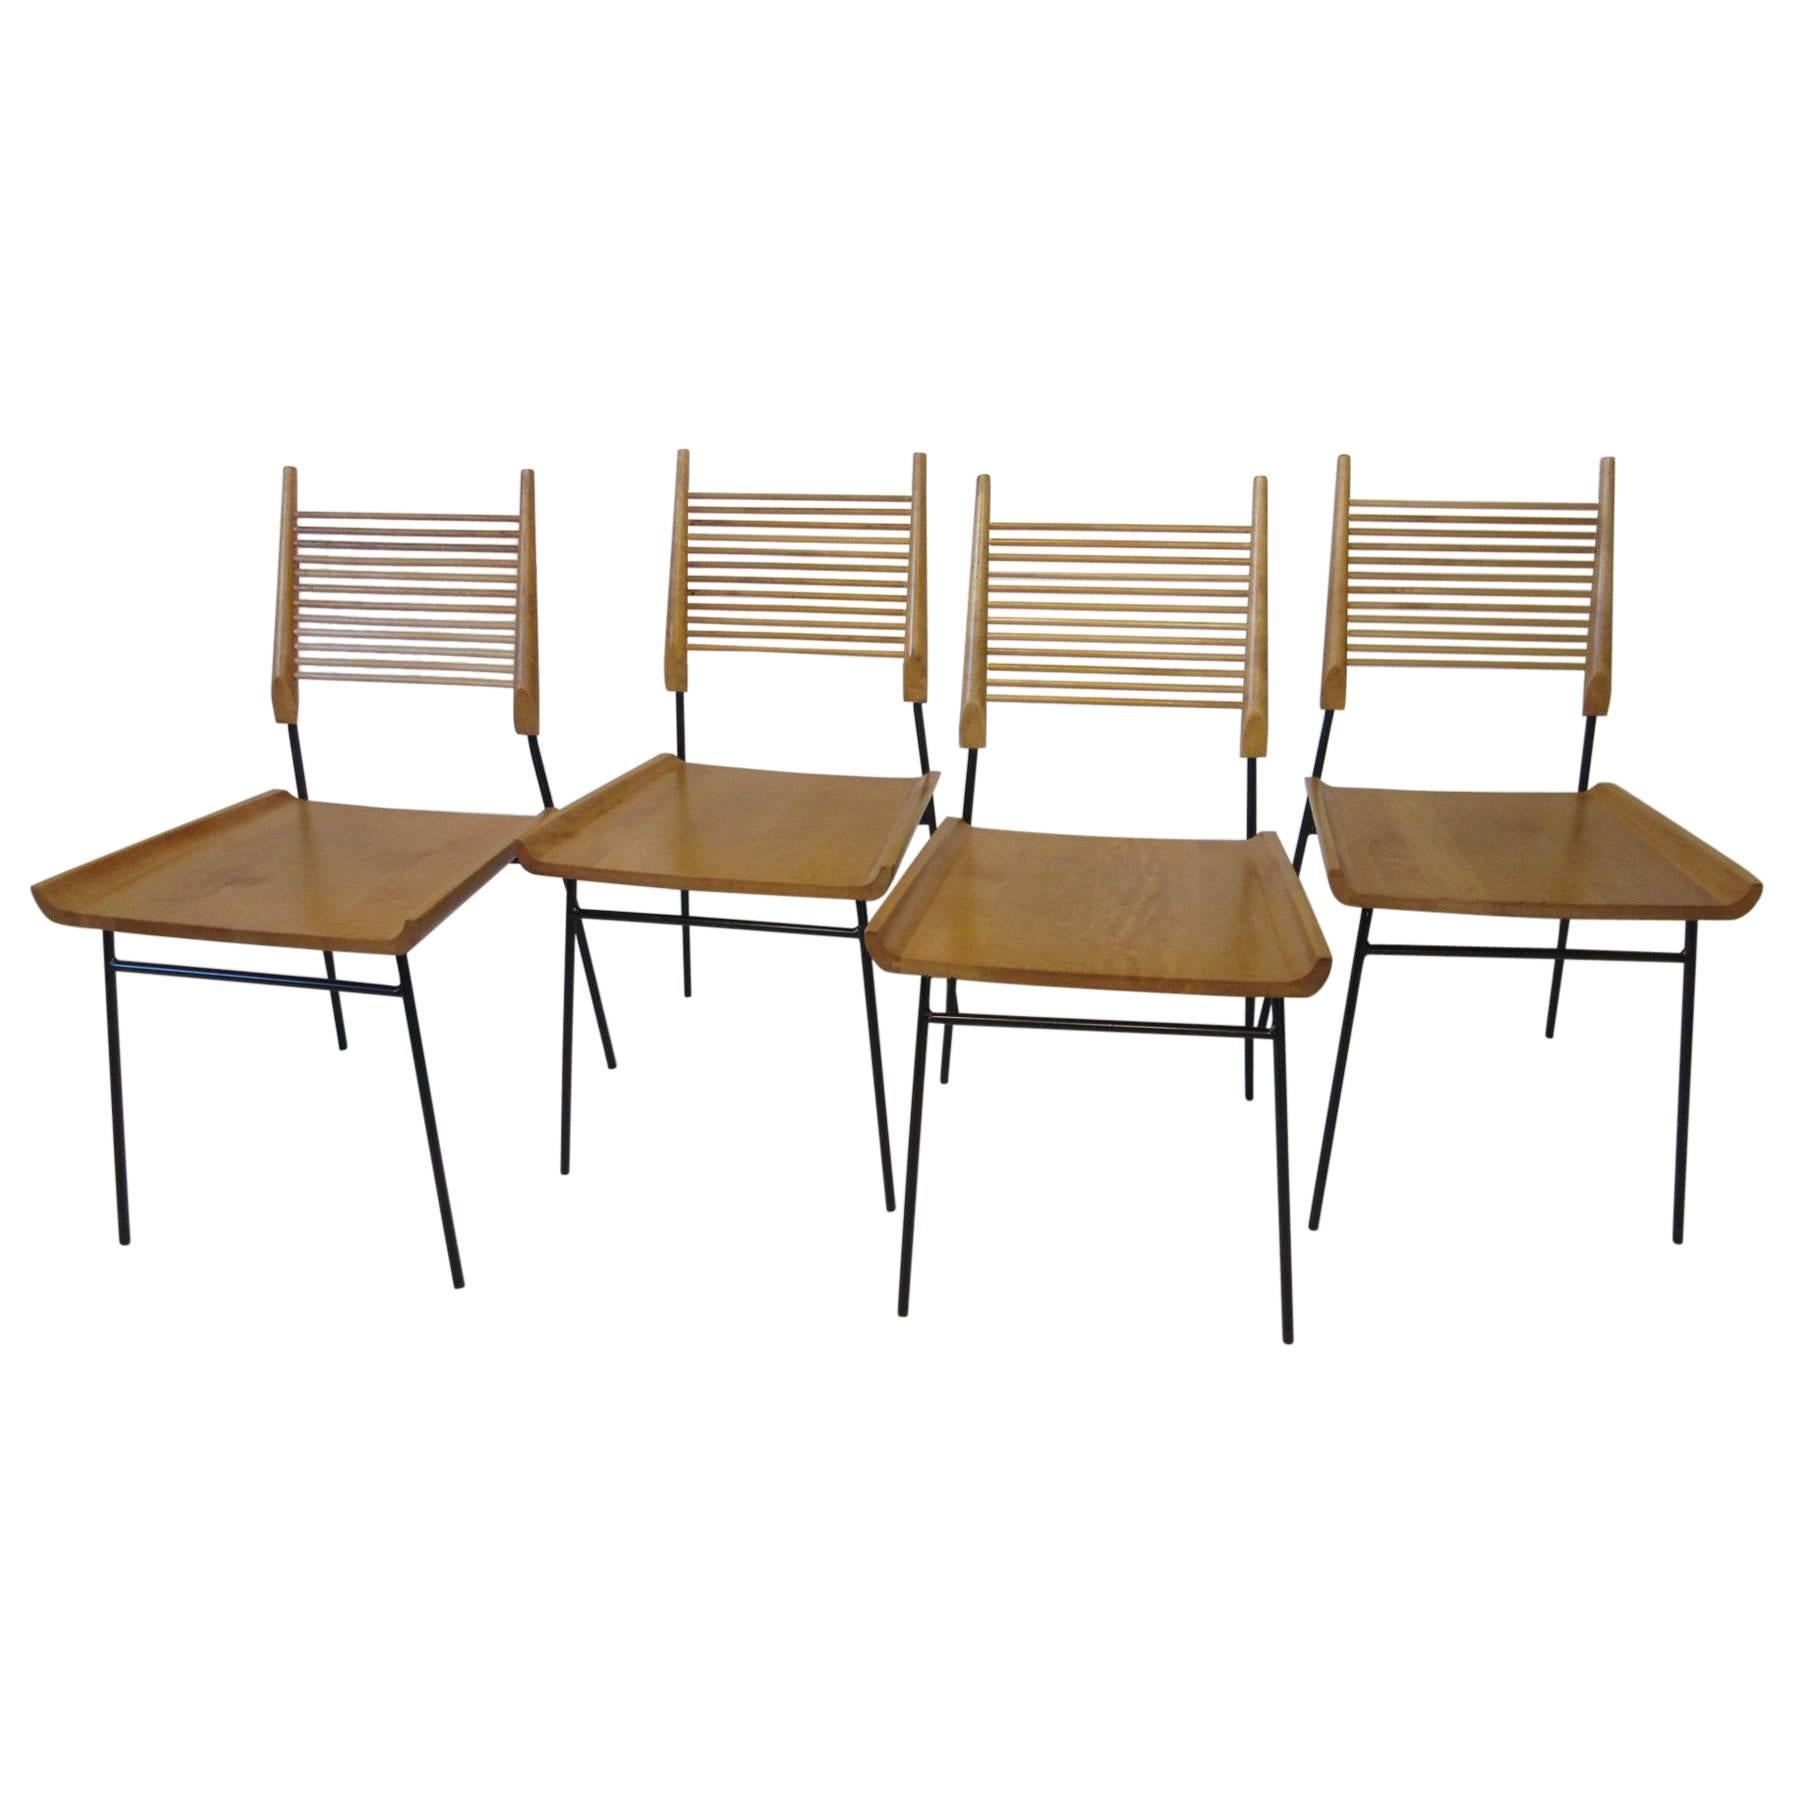 Paul McCobb Shovel Seat Dining Chairs from the Planner Group